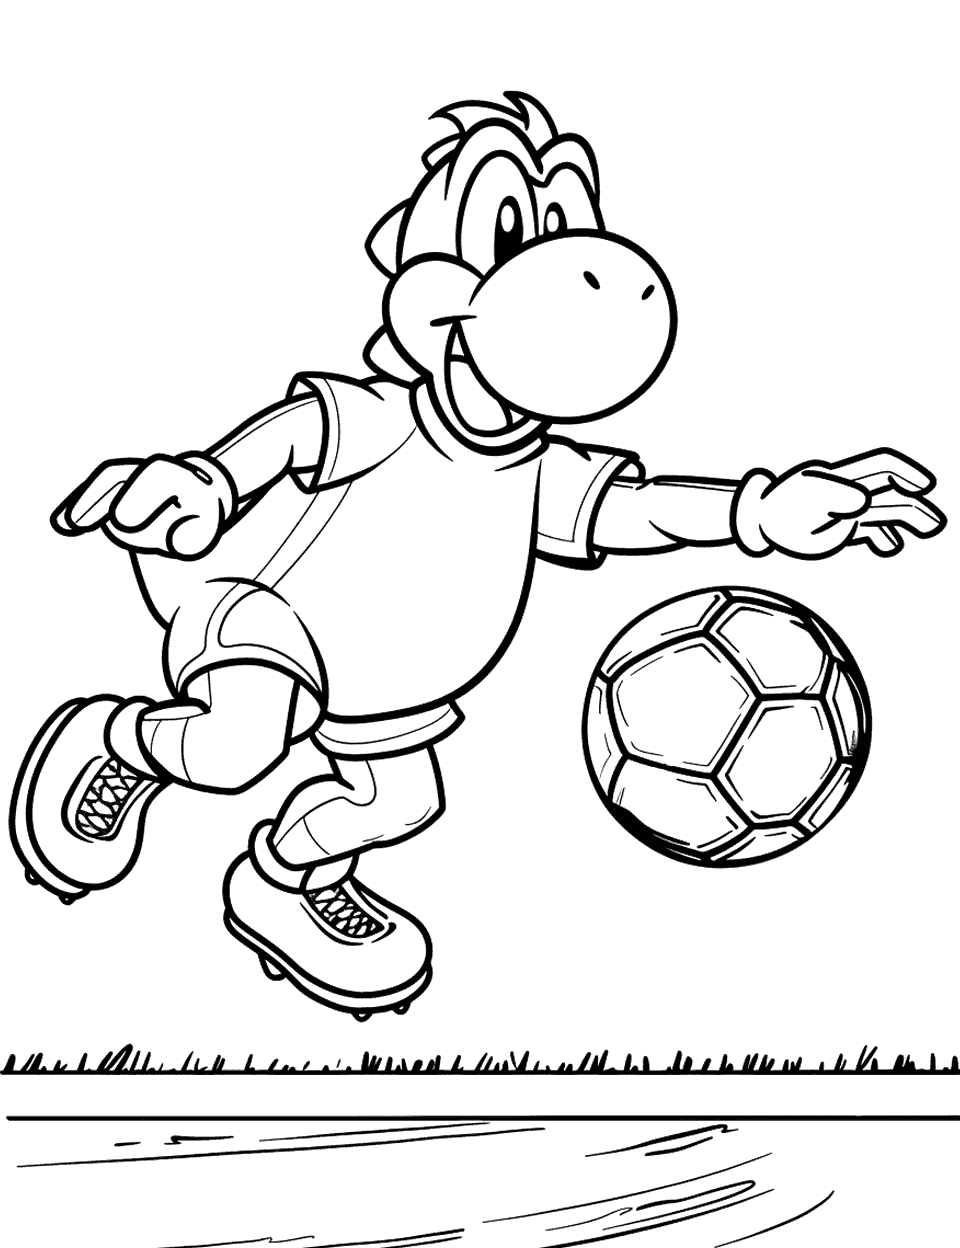 Yoshi and Soccer Coloring Page - Yoshi from the Mario series kicking a soccer ball.